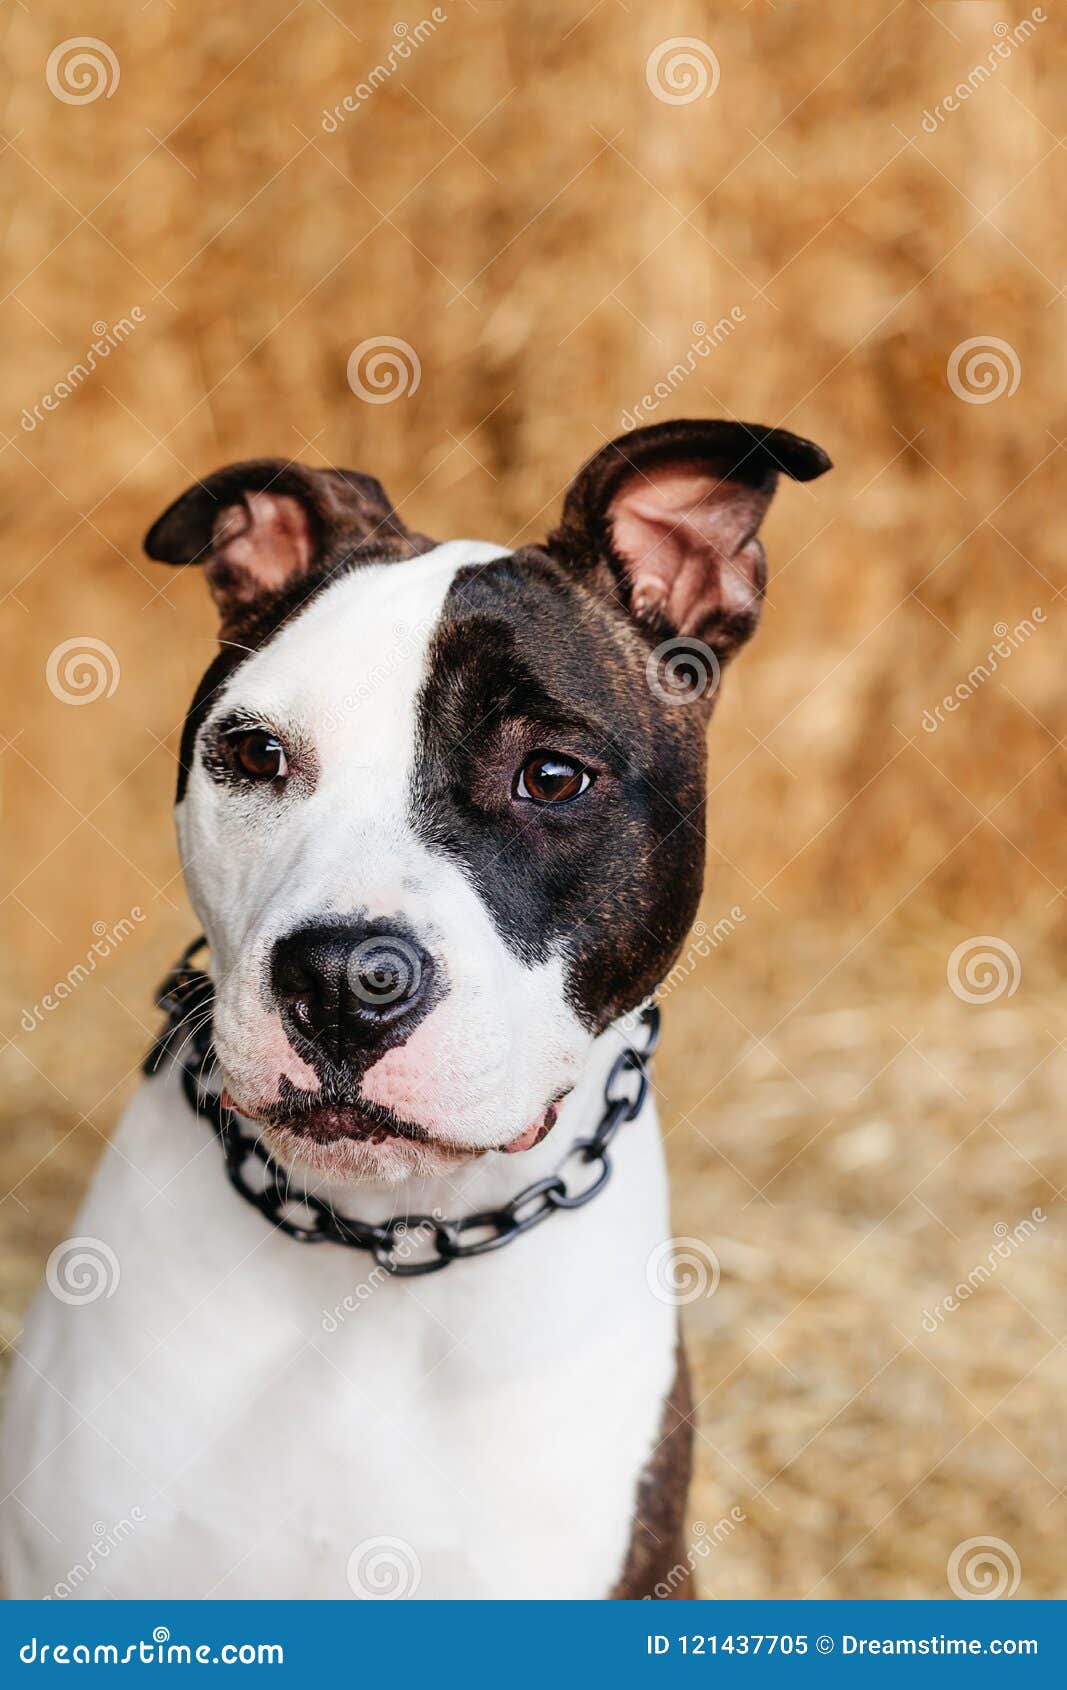 https://thumbs.dreamstime.com/z/american-staffordshire-terrier-amstaff-stafford-young-white-black-summer-time-copy-space-121437705.jpg